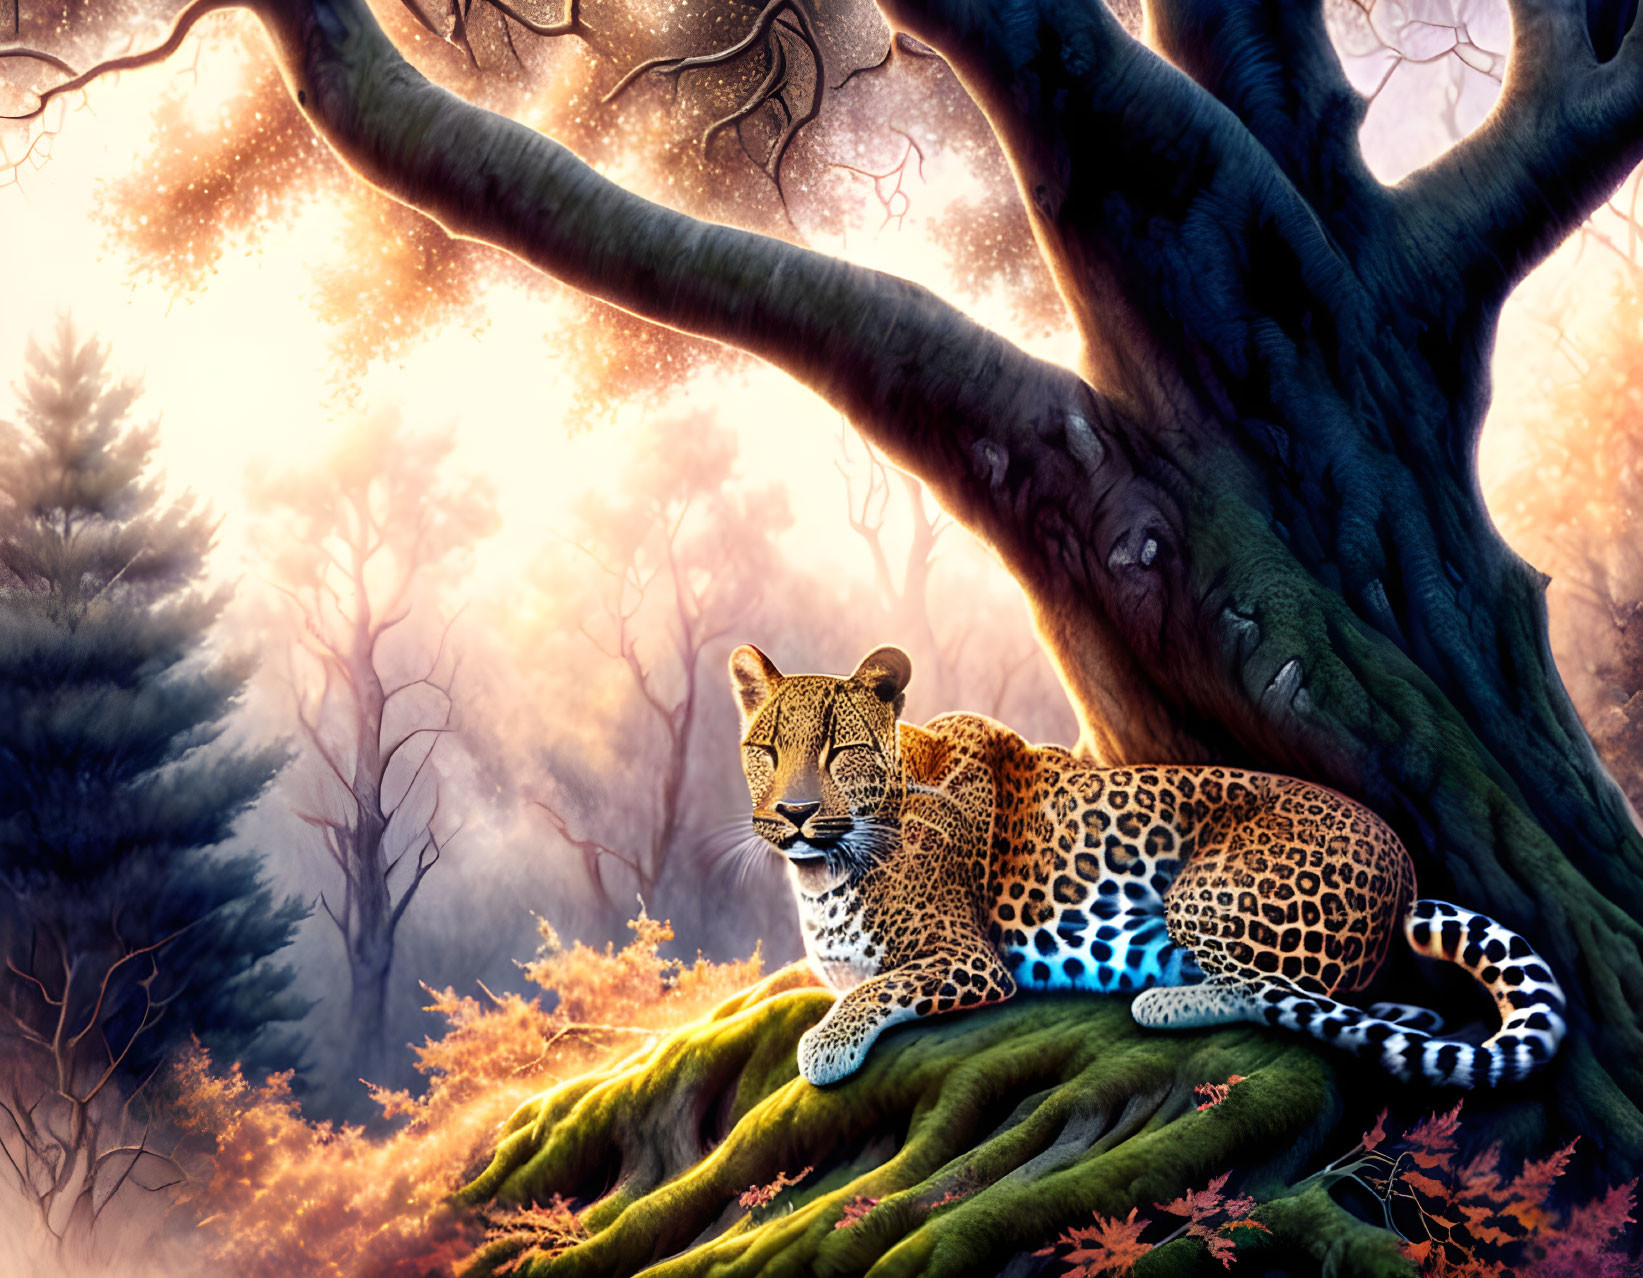 Majestic leopard resting on moss-covered roots in enchanted forest